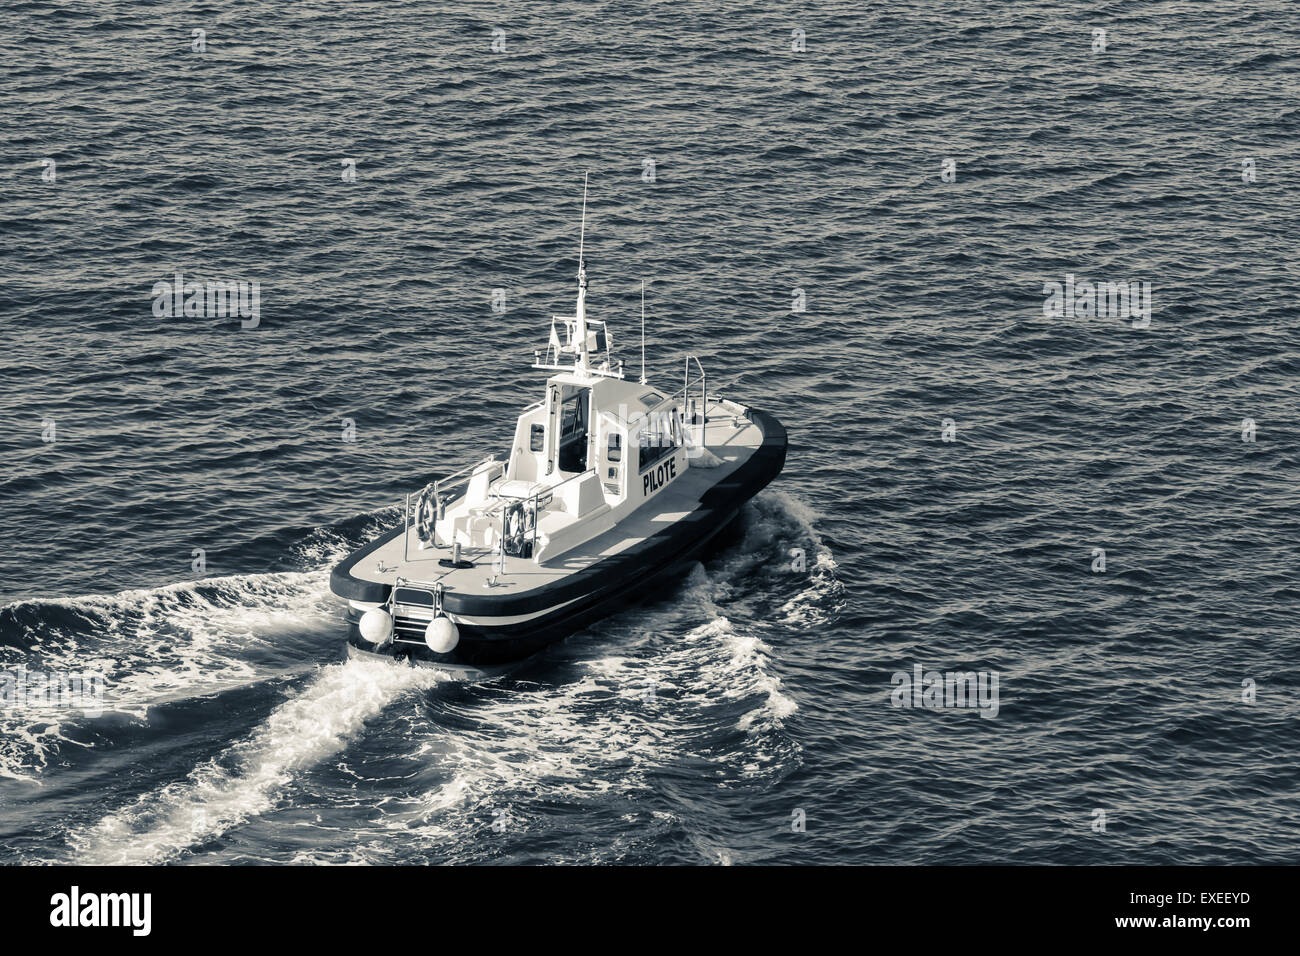 Small pilot boat is underway on a sea water, monochrome photo Stock Photo